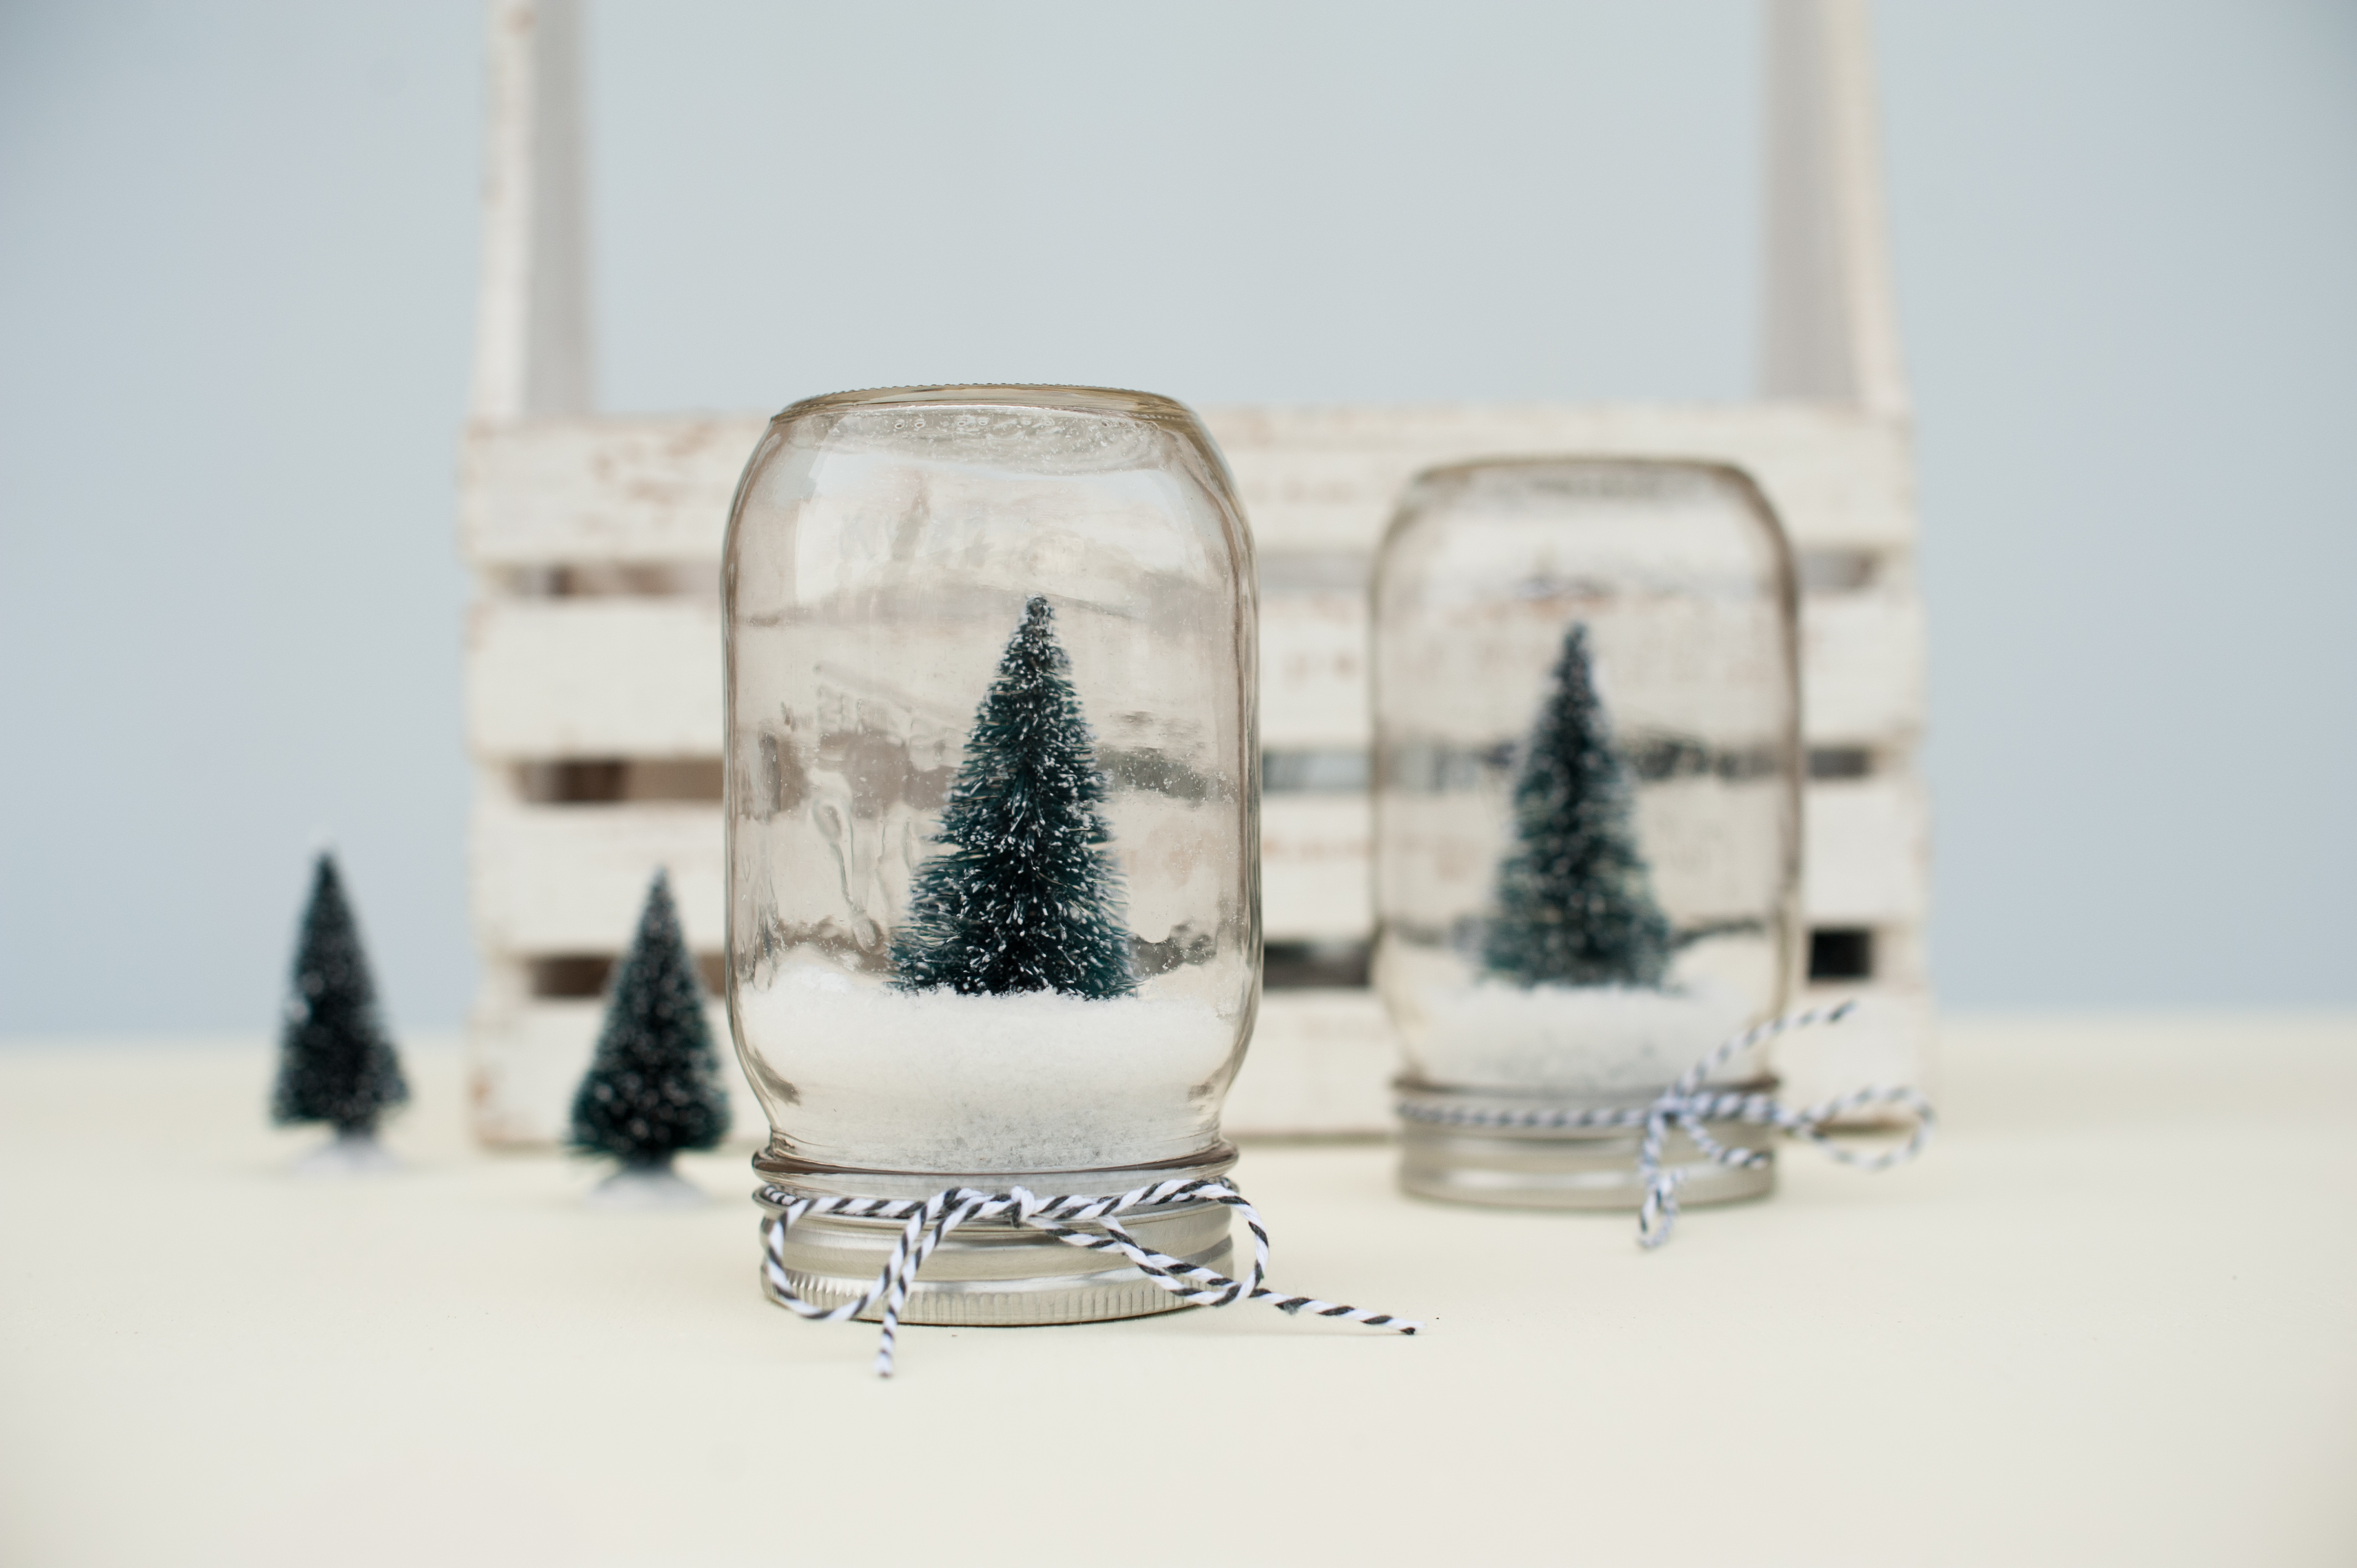 How to Make a Snow Globe (without water) - Upcycling Project!